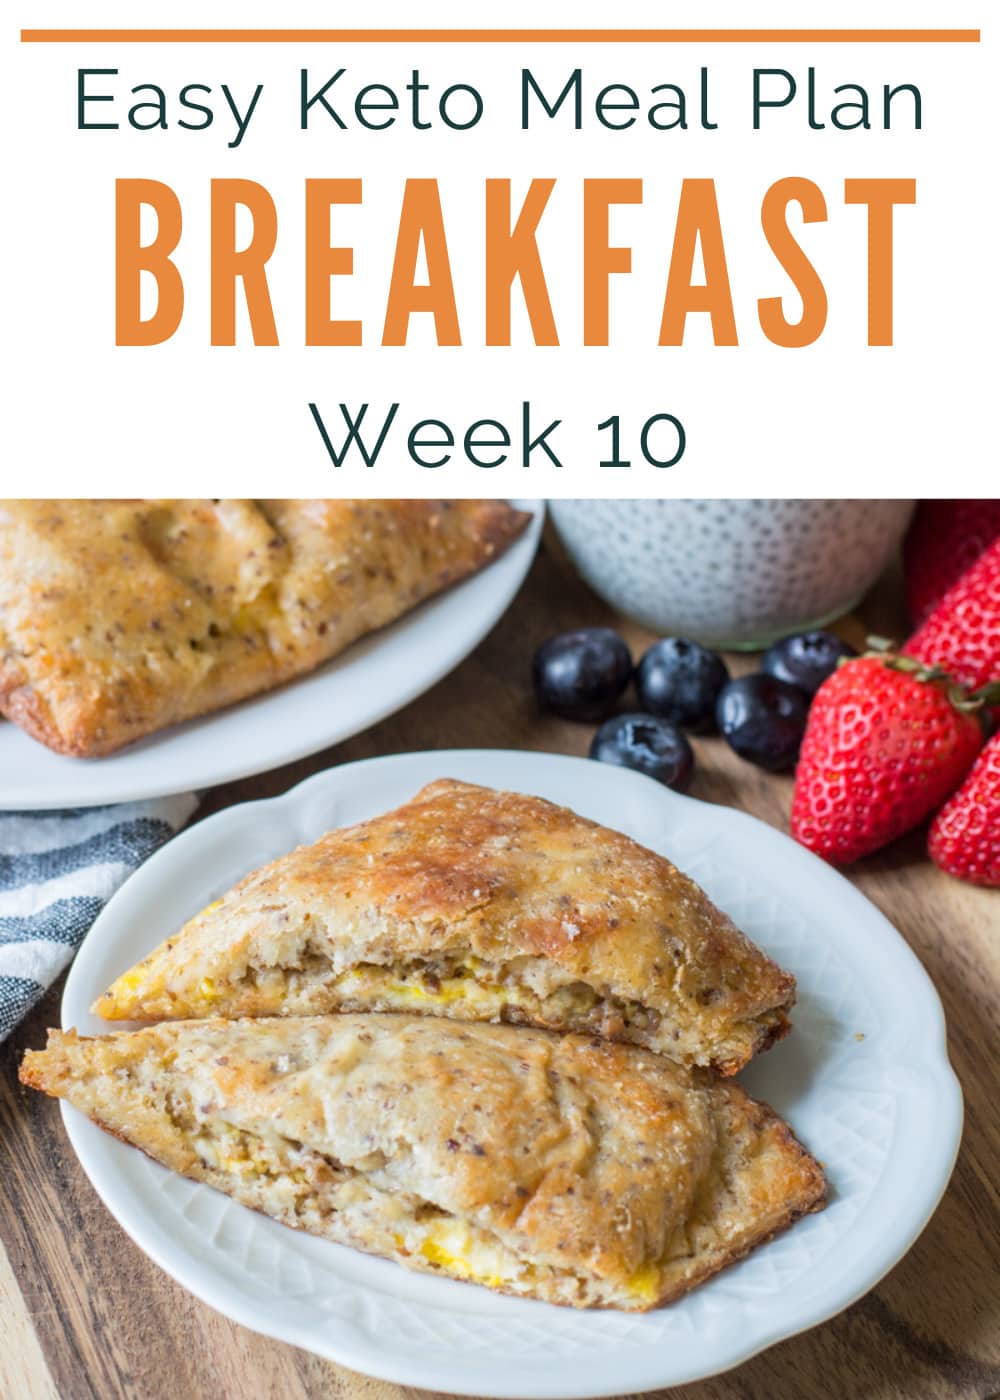 These Weekly Keto Breakfast Ideas make meal prepping and carb counting easy! Use the printable grocery list, meal prep tips, along with lunch and dinner recommendations for 5 full days of delicious keto meals.